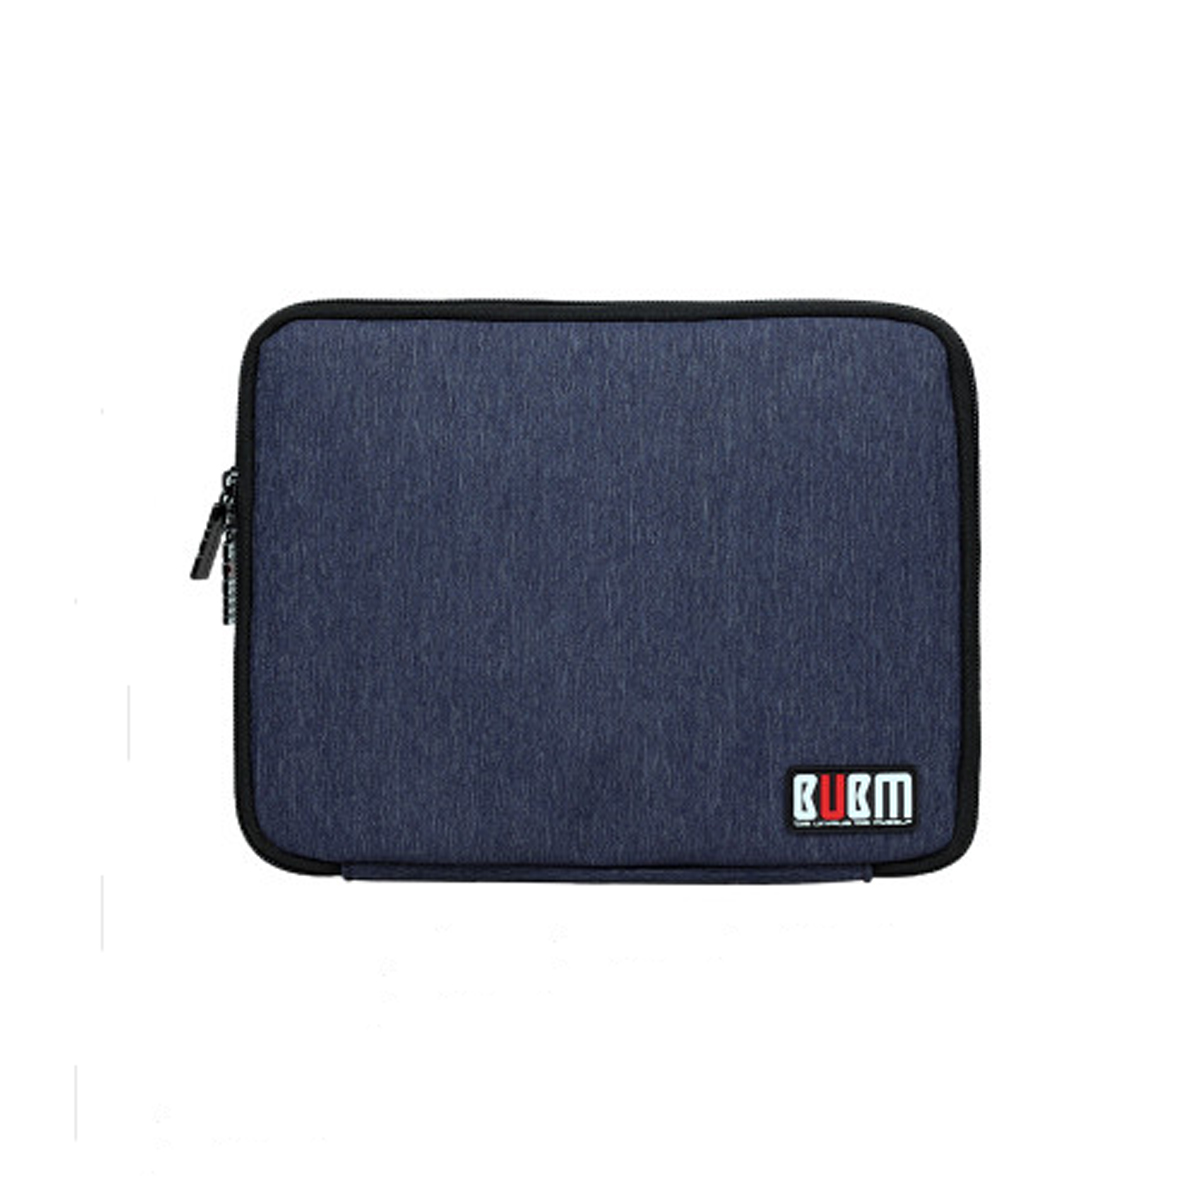 Find BUBM oversized Capacity Watch Tablet Earphone U Disk Cable Digital Devices Cable Organizer Case Storage Bag for Sale on Gipsybee.com with cryptocurrencies